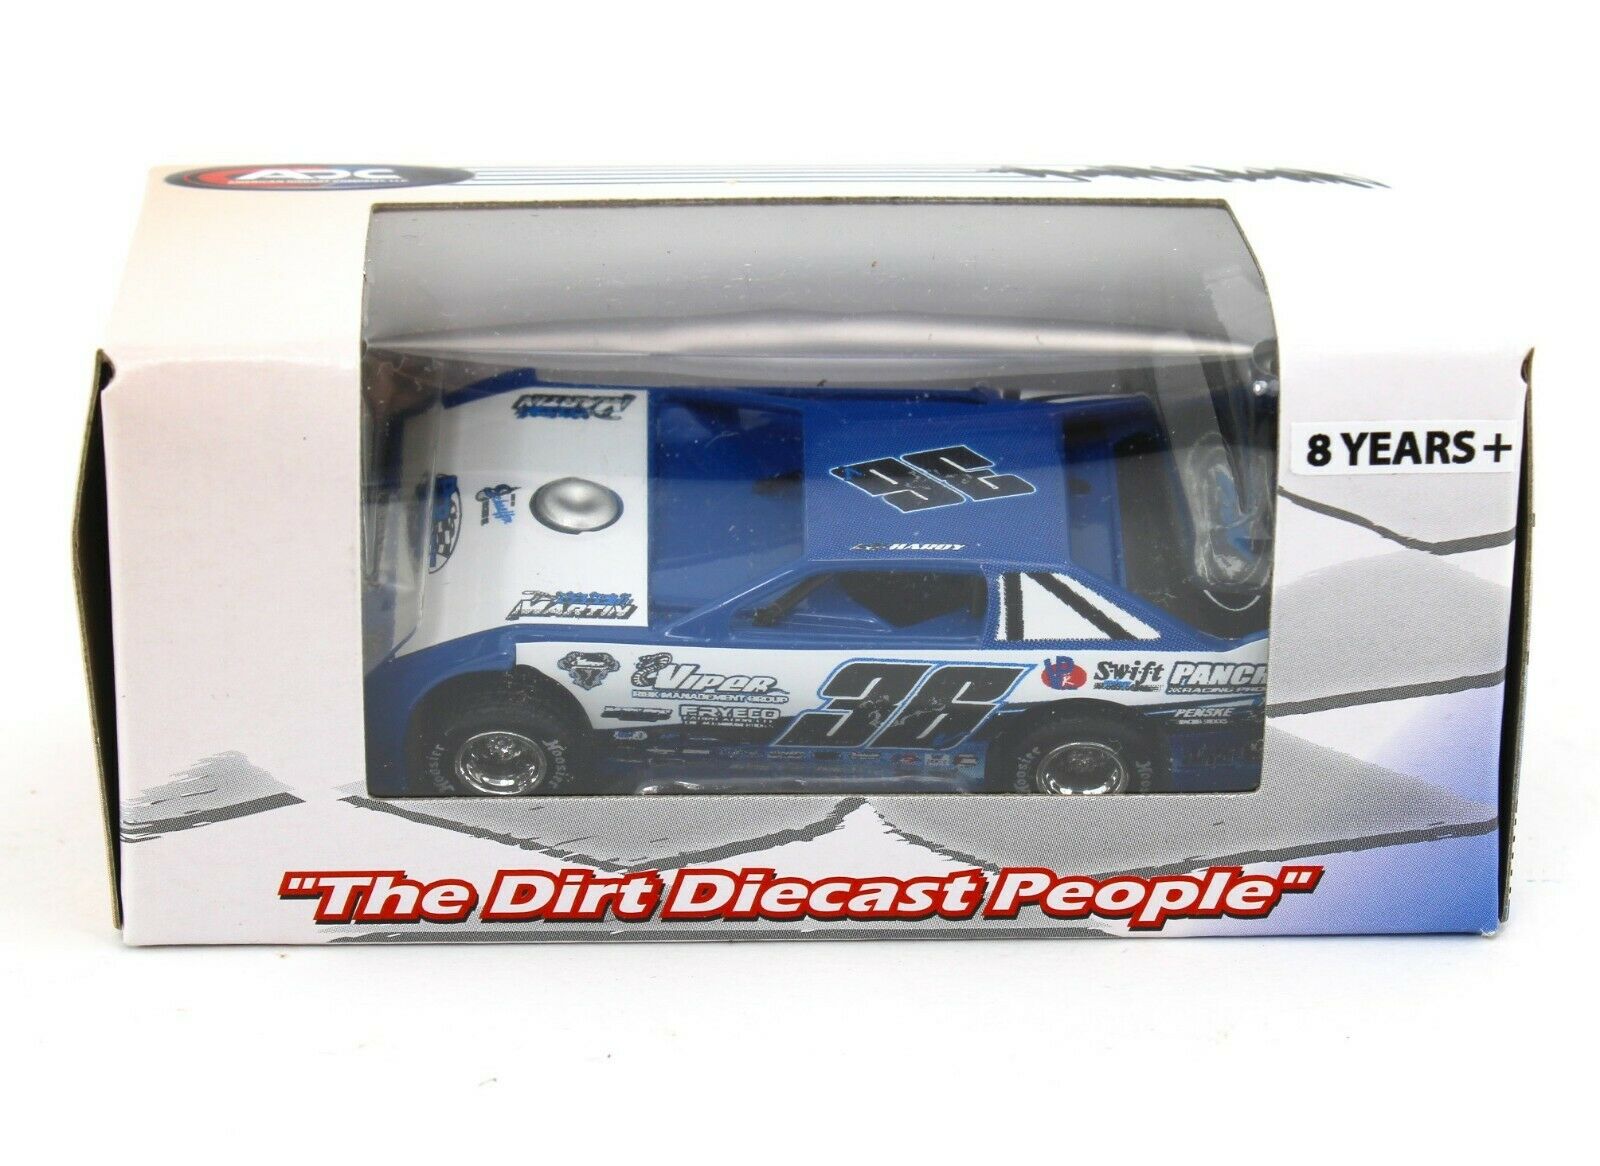 1:64 ADC Dirt Late Model *KYLE HARDY* #36 Viper Motorsports